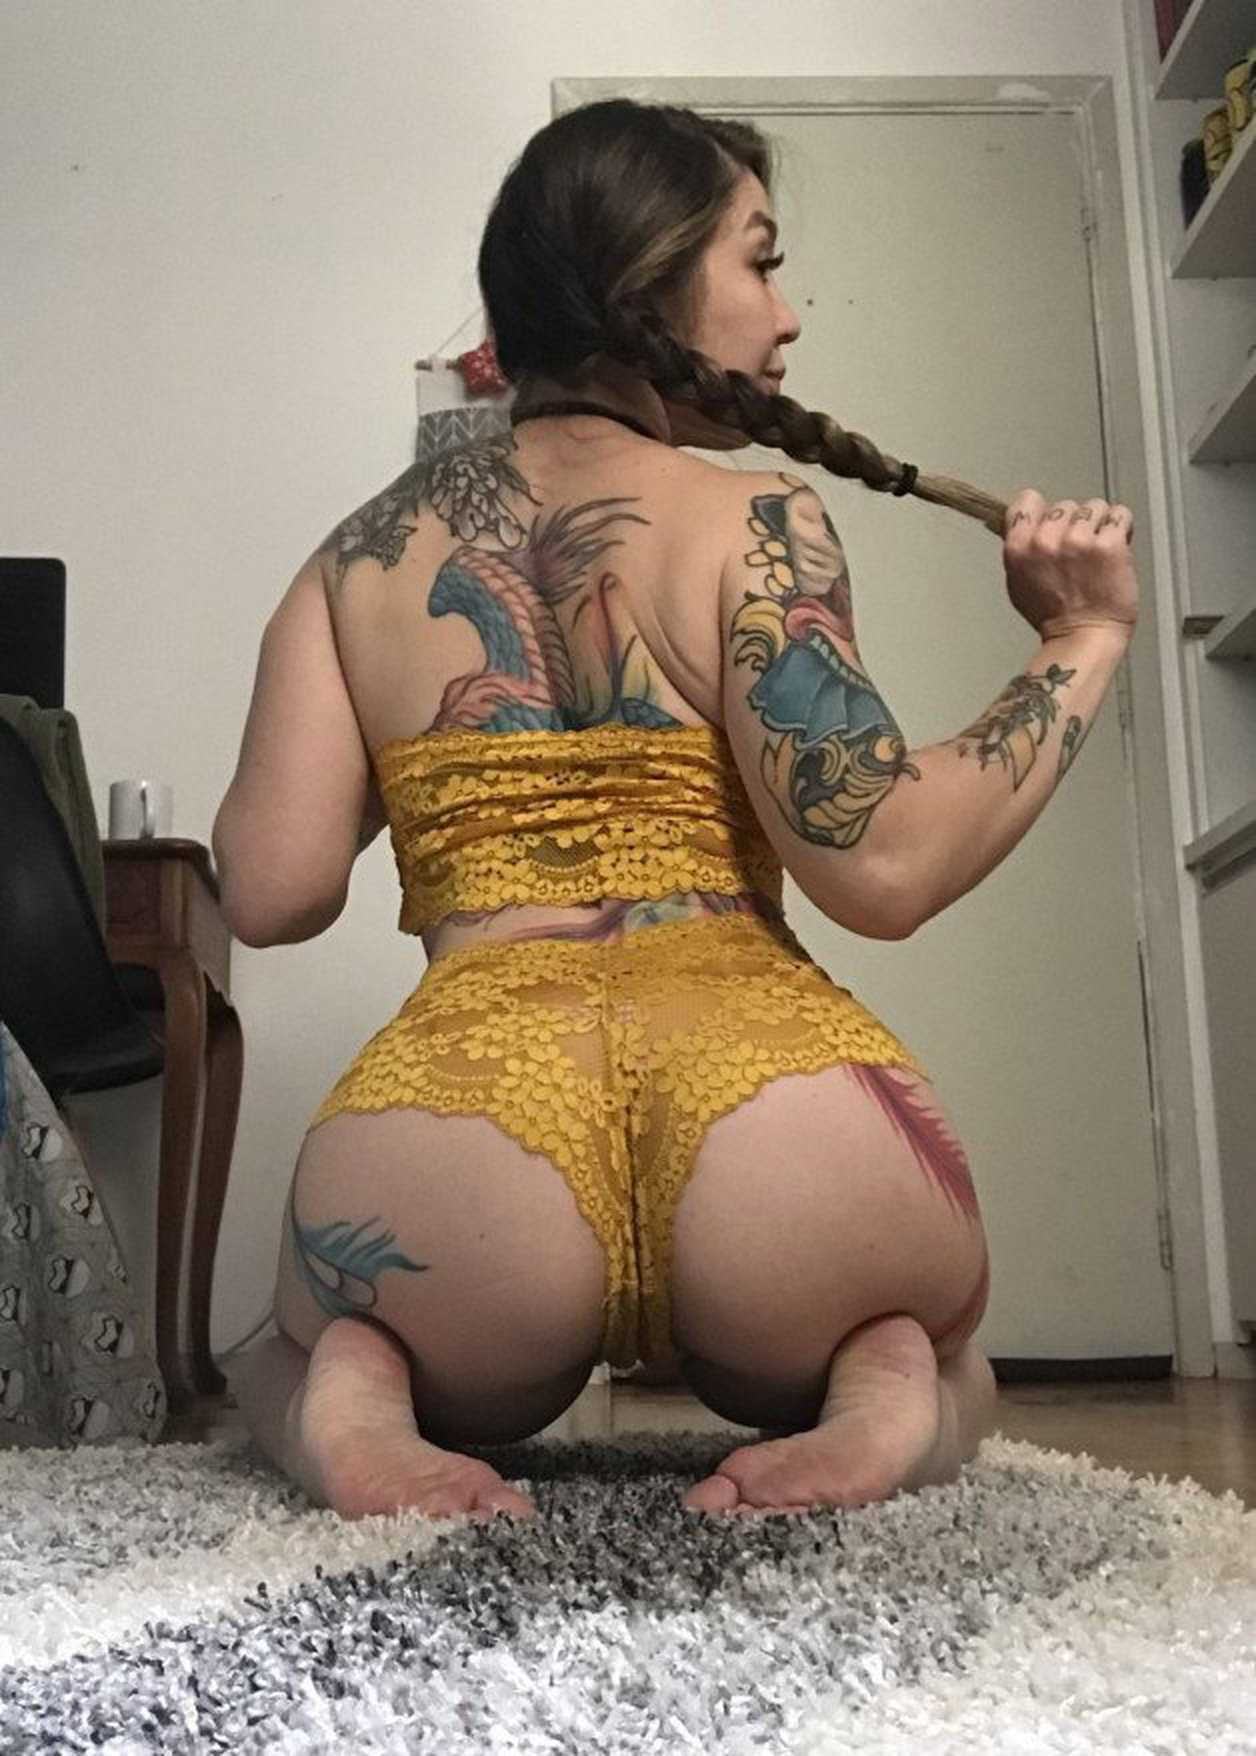 Photo by mistressgabxx with the username @mistressgabxx, who is a verified user,  May 11, 2022 at 3:47 PM. The post is about the topic Ass and the text says 'ADD ME SNAP mistressgabxx for instant responses 😈'